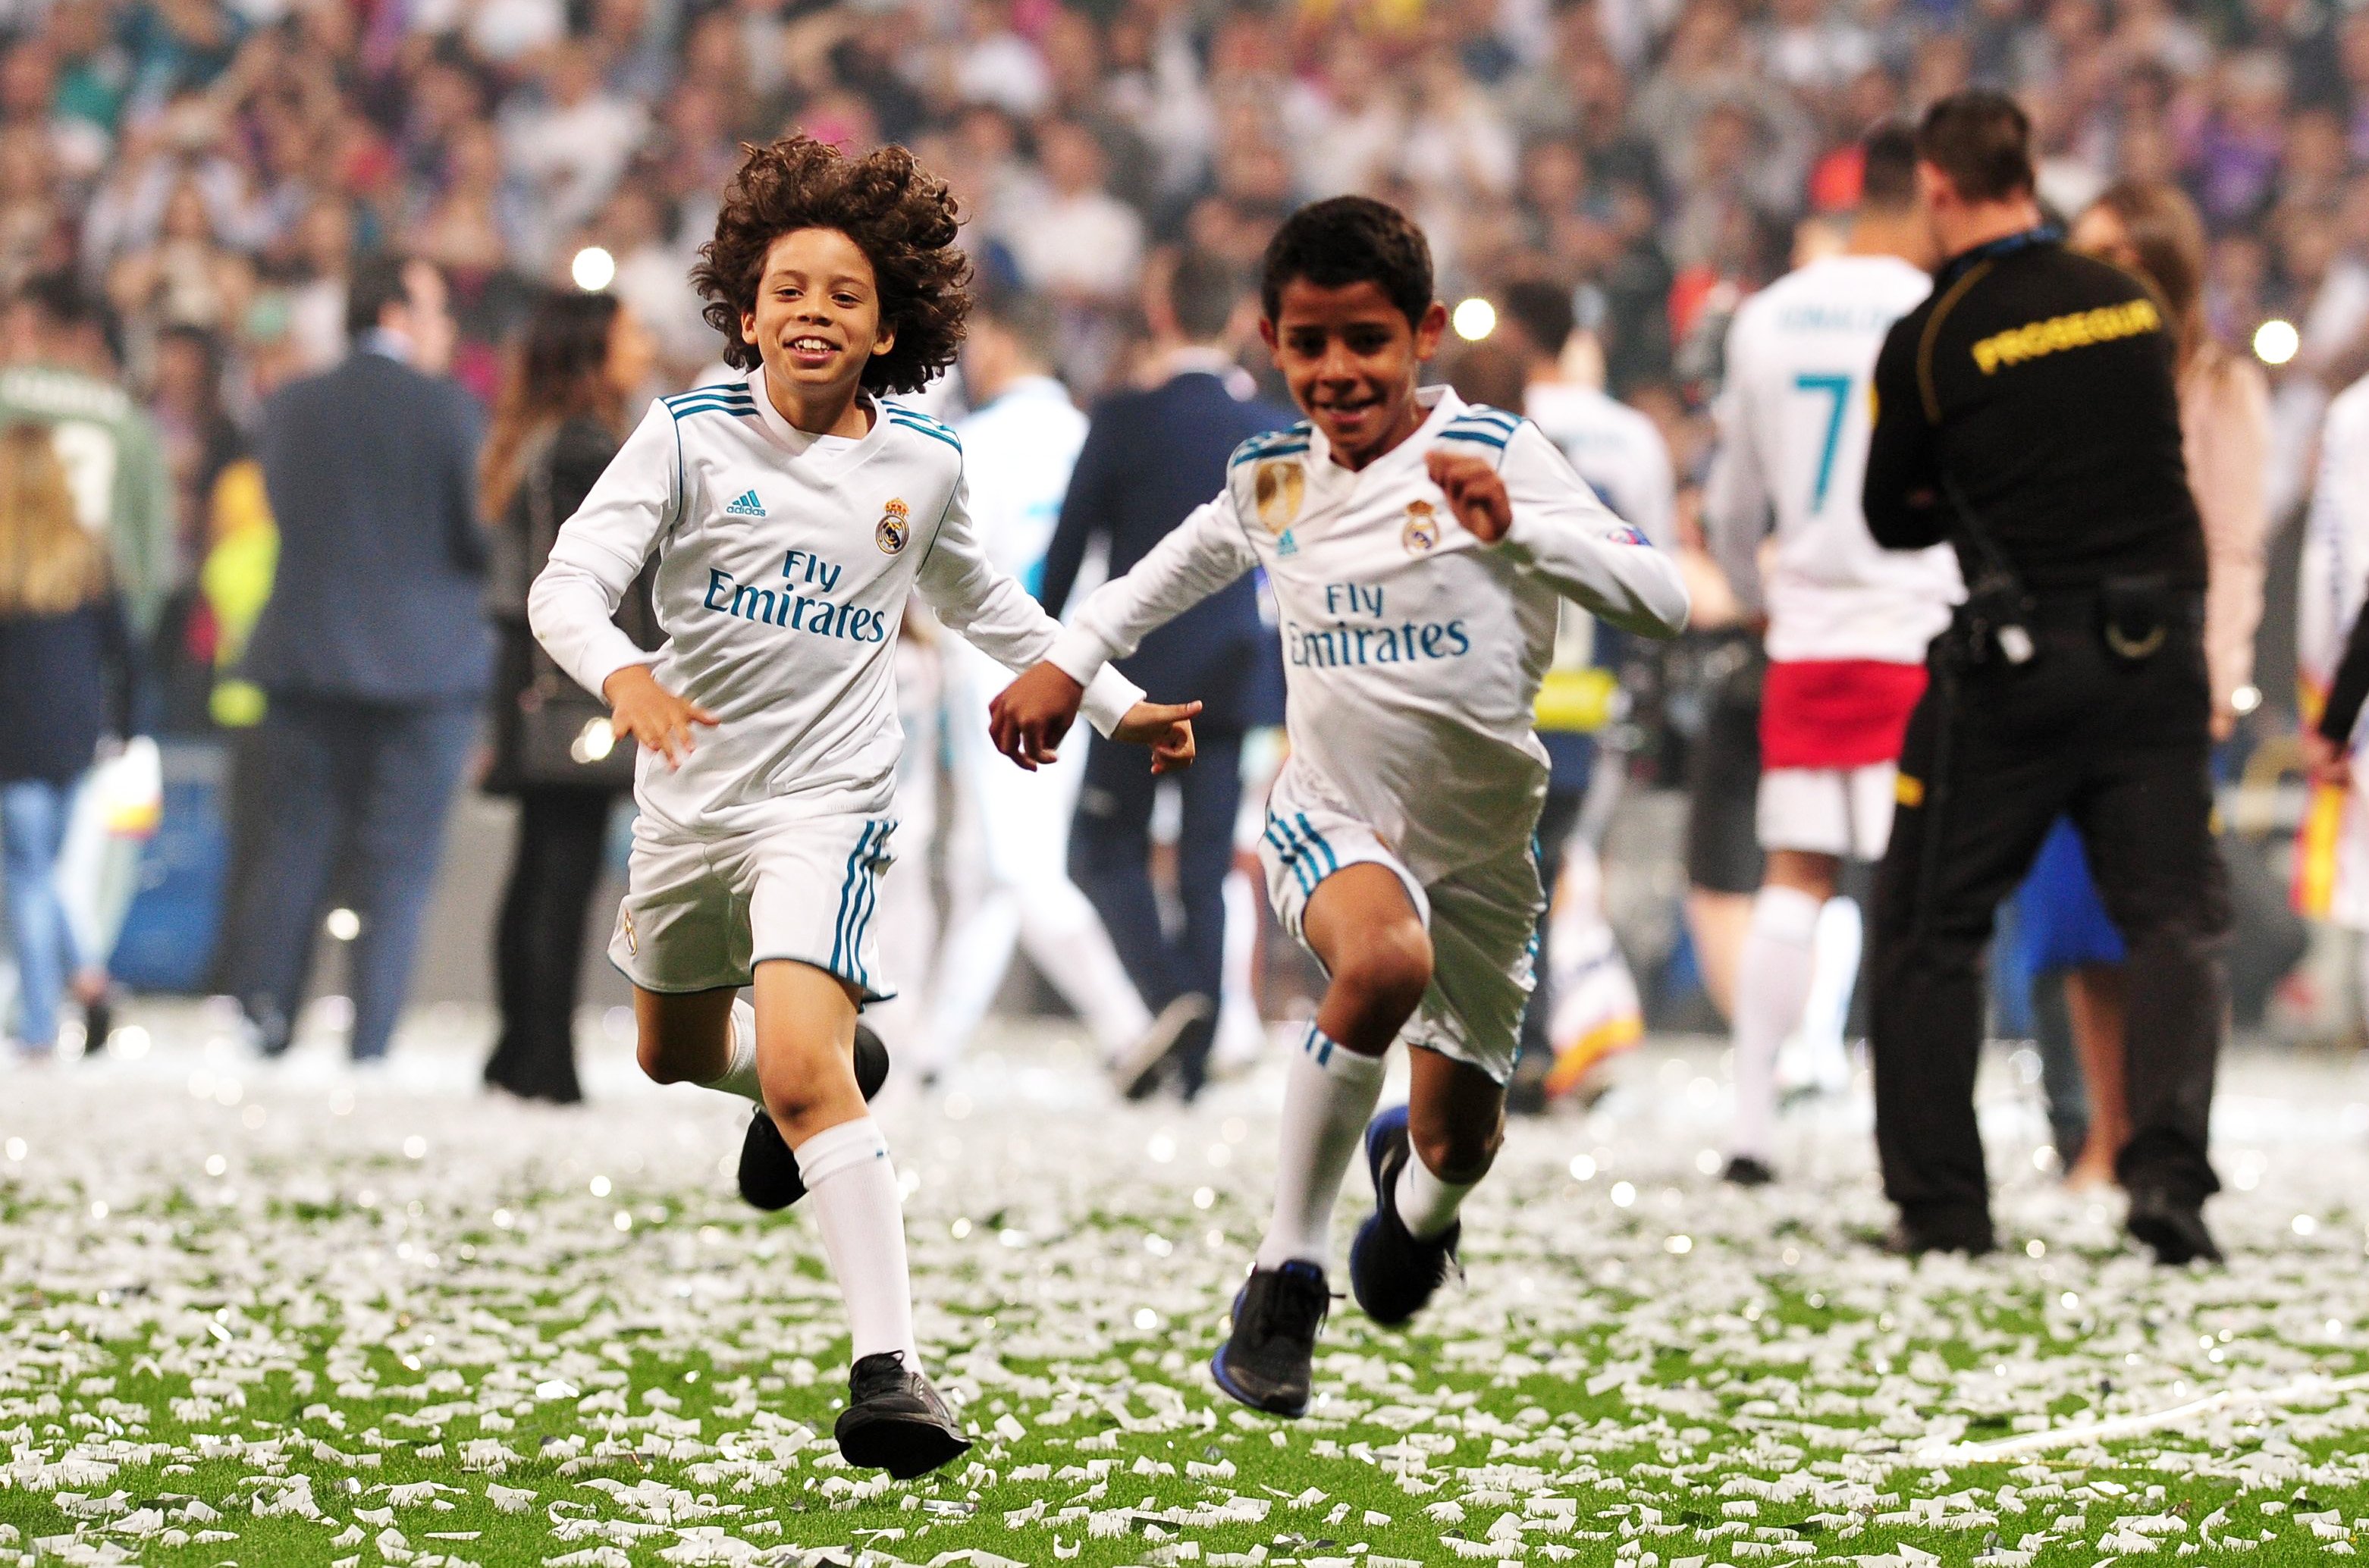 Cristiano Ronaldo's son Cristiano Ronaldo Jr. and Marcelo's son Enzo Vieira during the Real Madrid team celebration on May 27, 2018 in Madrid. | Source: Getty Images